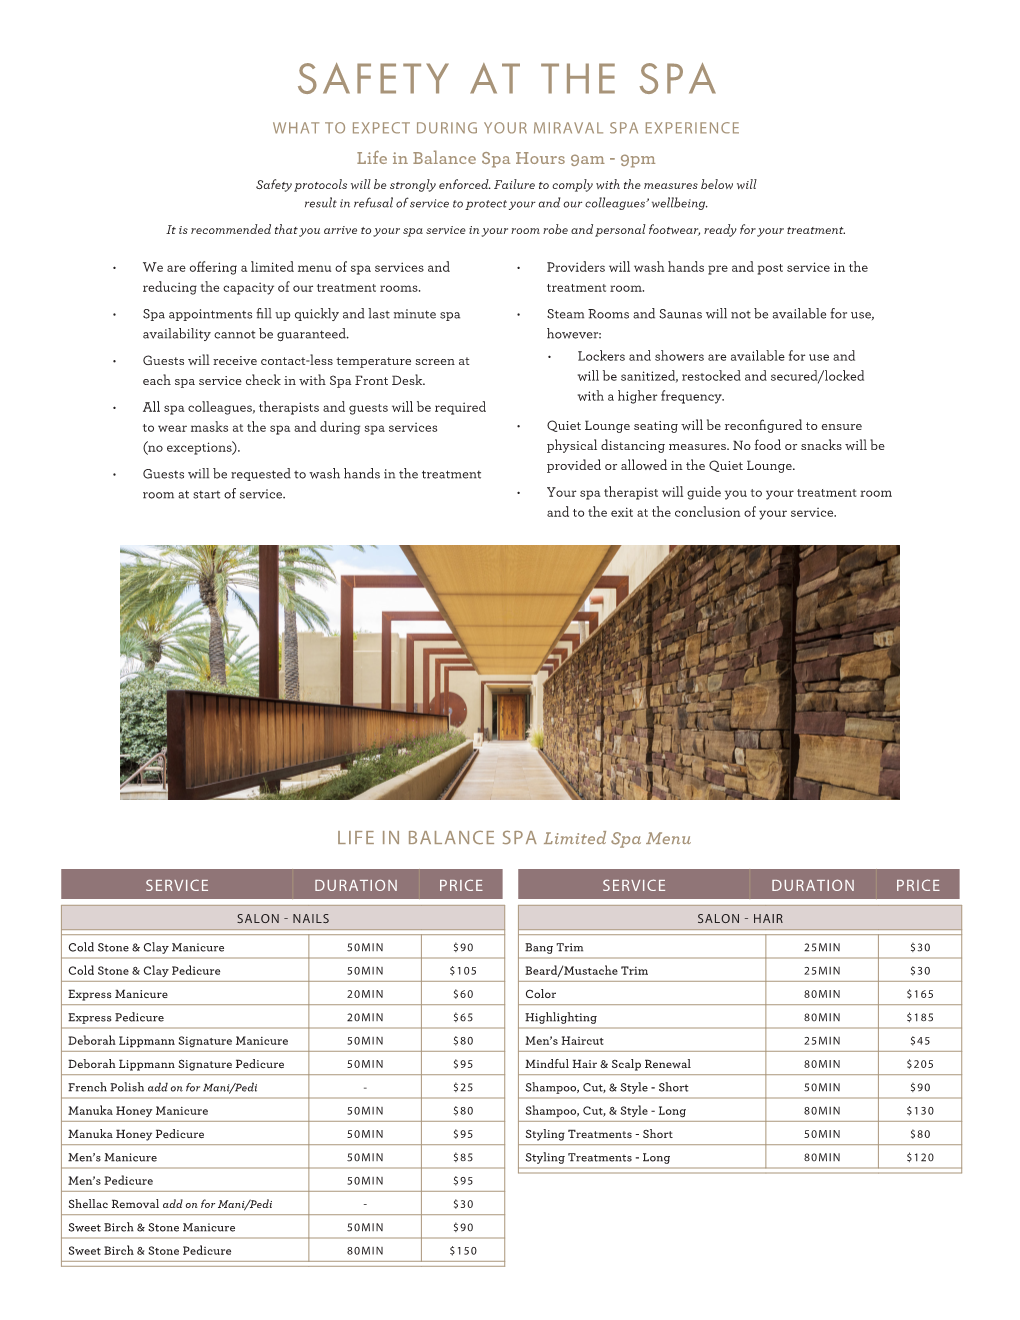 SAFETY at the SPA WHAT to EXPECT DURING YOUR MIRAVAL SPA EXPERIENCE Life in Balance Spa Hours 9Am - 9Pm Safety Protocols Will Be Strongly Enforced